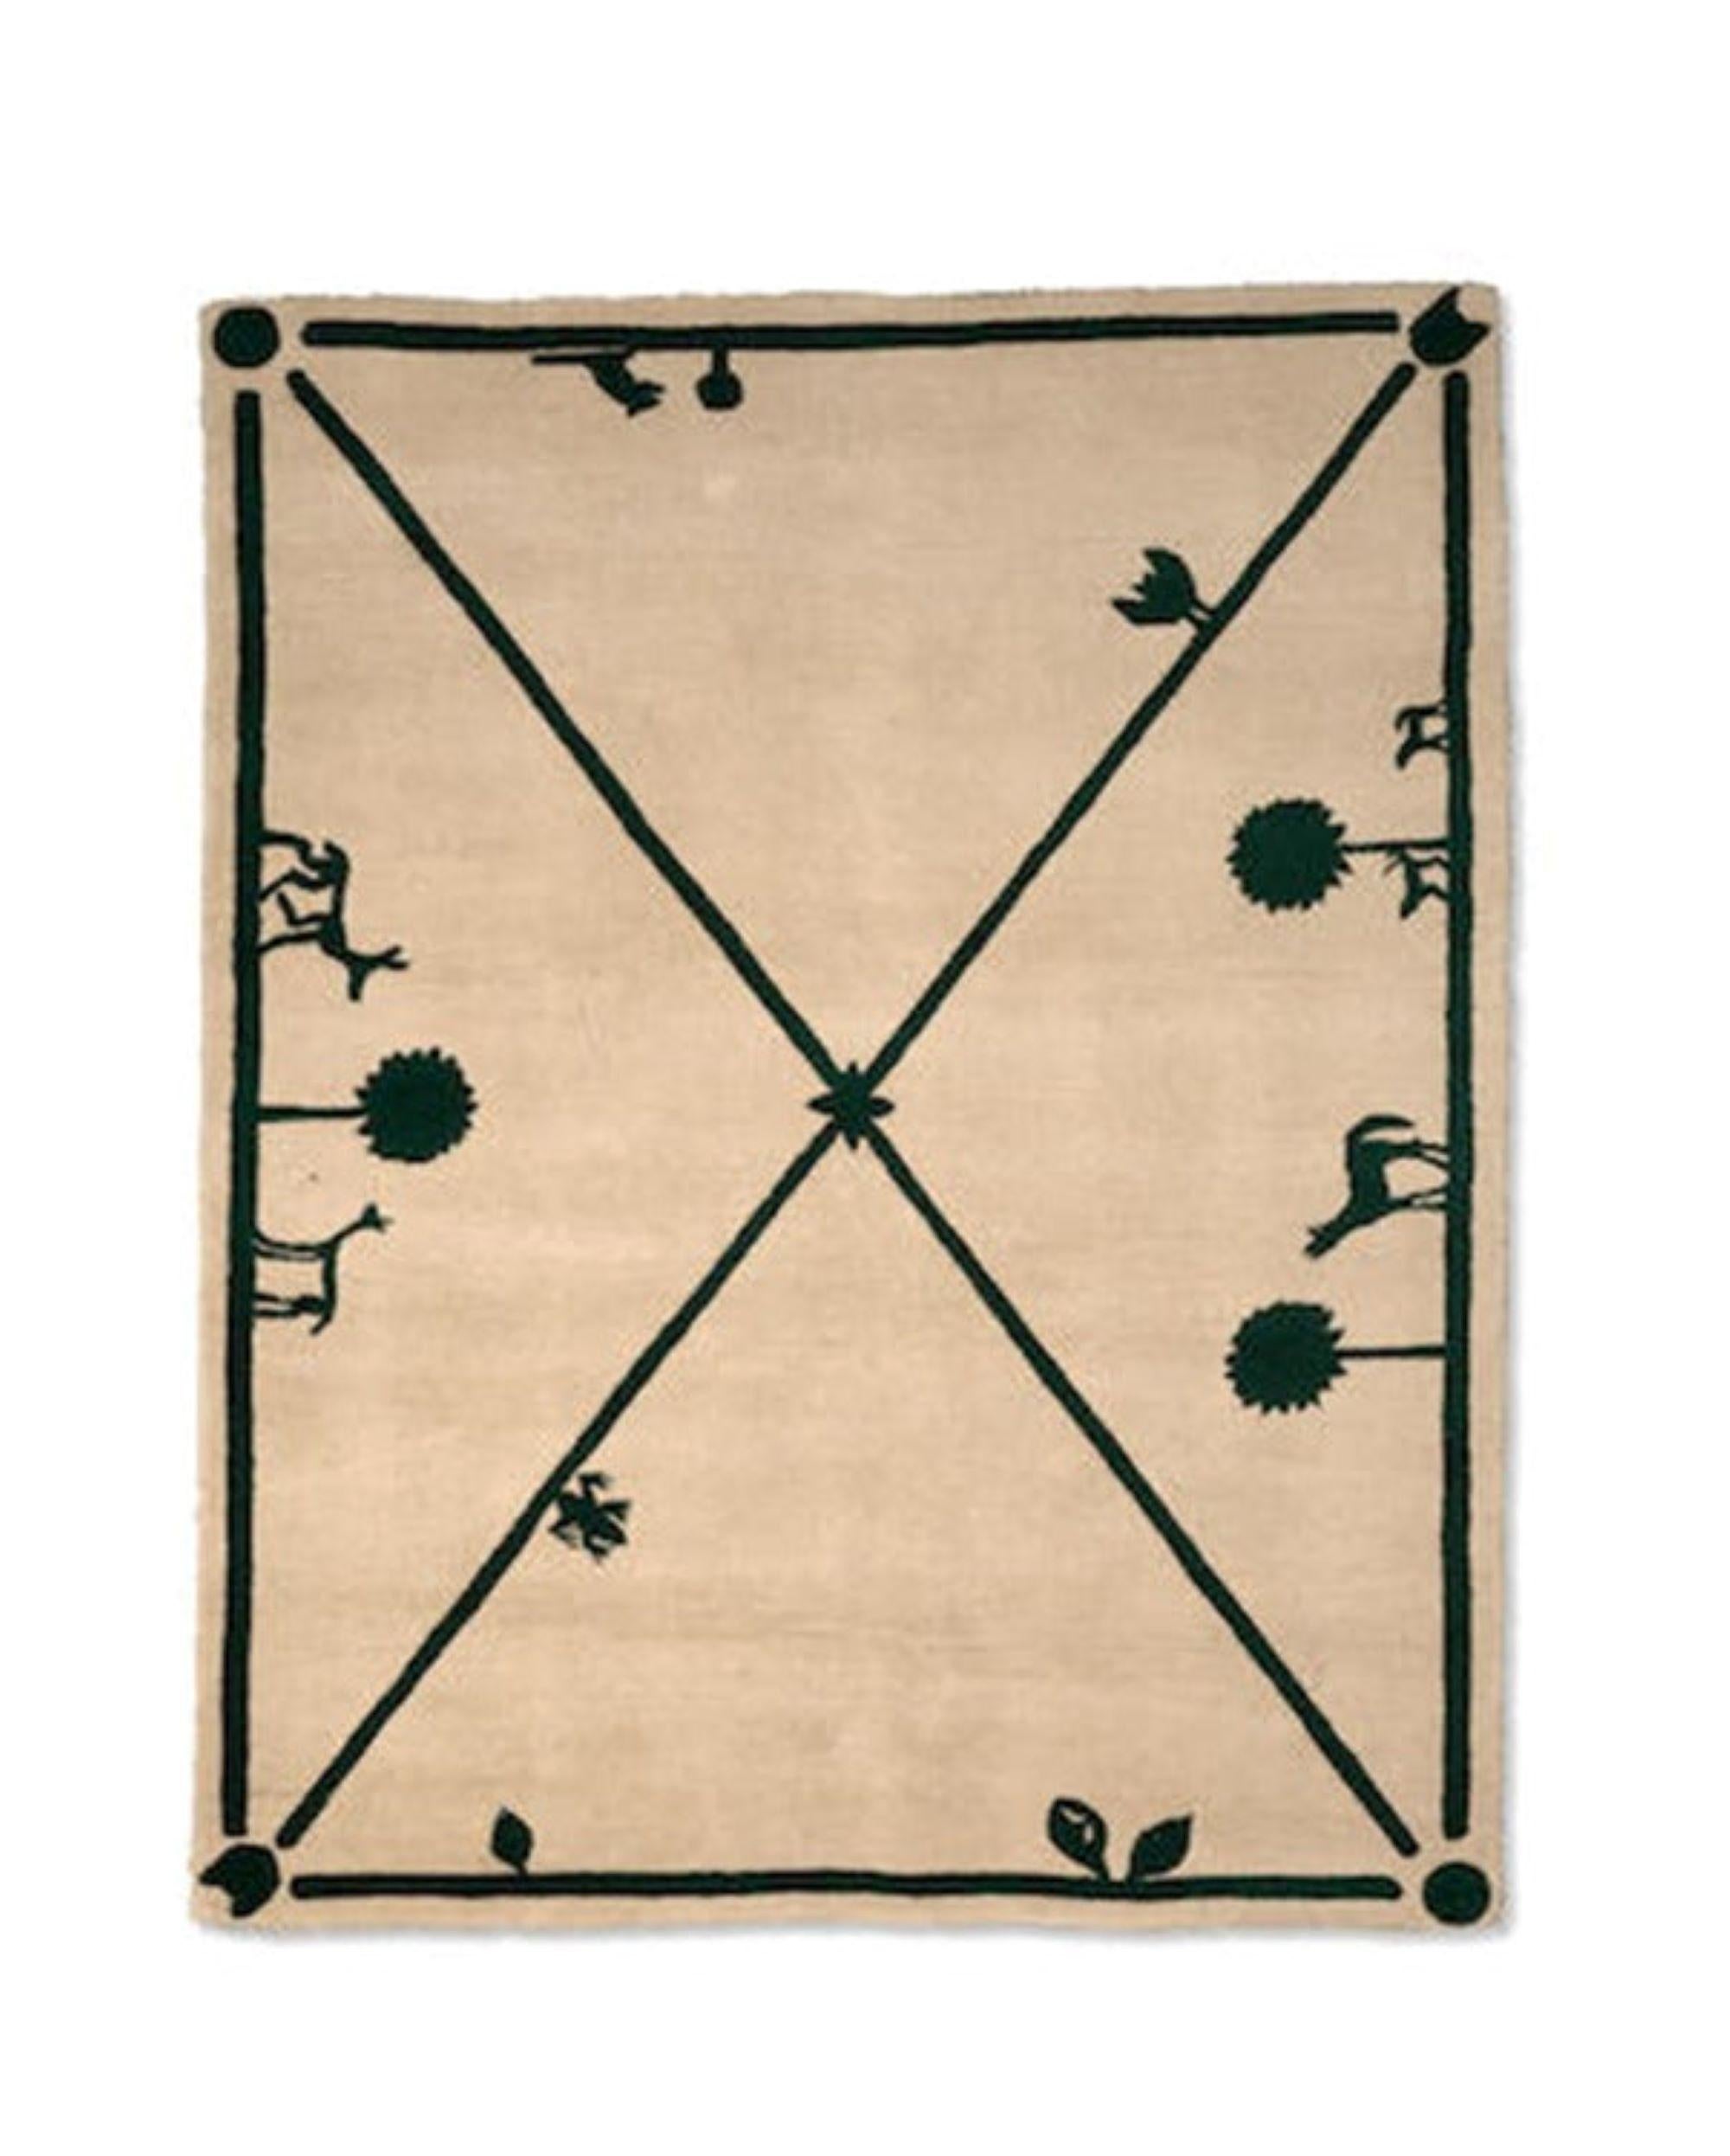 After Promenade des Amis, 1984


Material: Wool. Woven pile rug.
Dimensions: 91X 68 3/4 inches (231X174CM)

Signature: Inscribed D/G on the reverse and woven

label “Diego Giacometti”
Provenance: Private collection, France
Condition: No